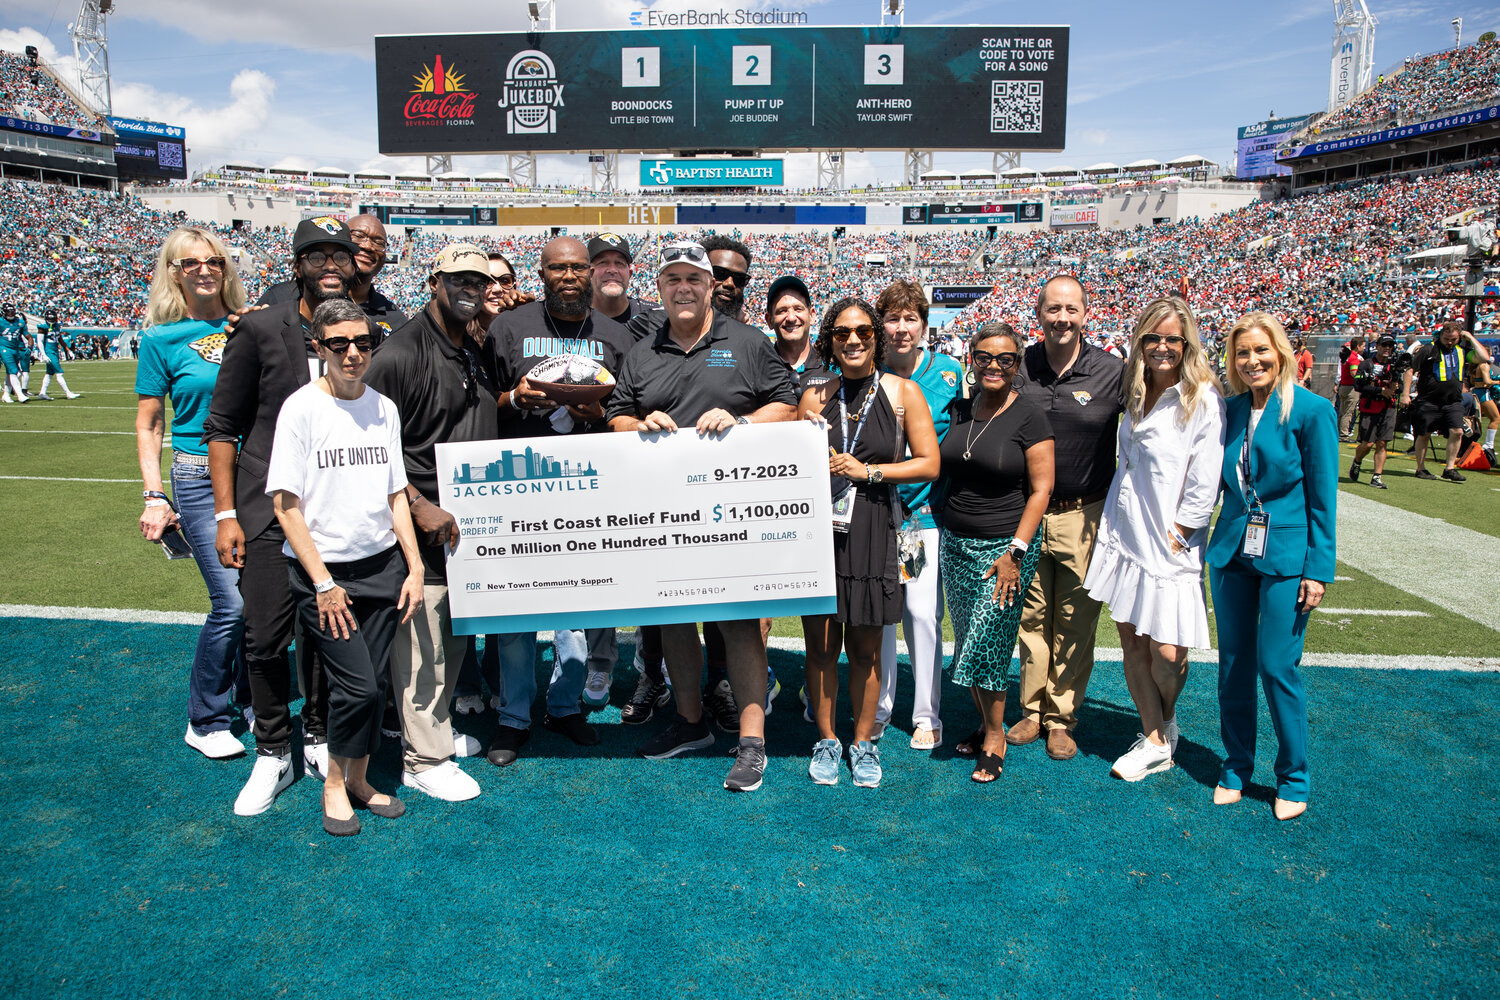 A check donation of $1.1 million was presented to the First Coast Relief Fund to help the New Town community, following the recent shooting that took place, on the field during the home opener on Sept. 17.